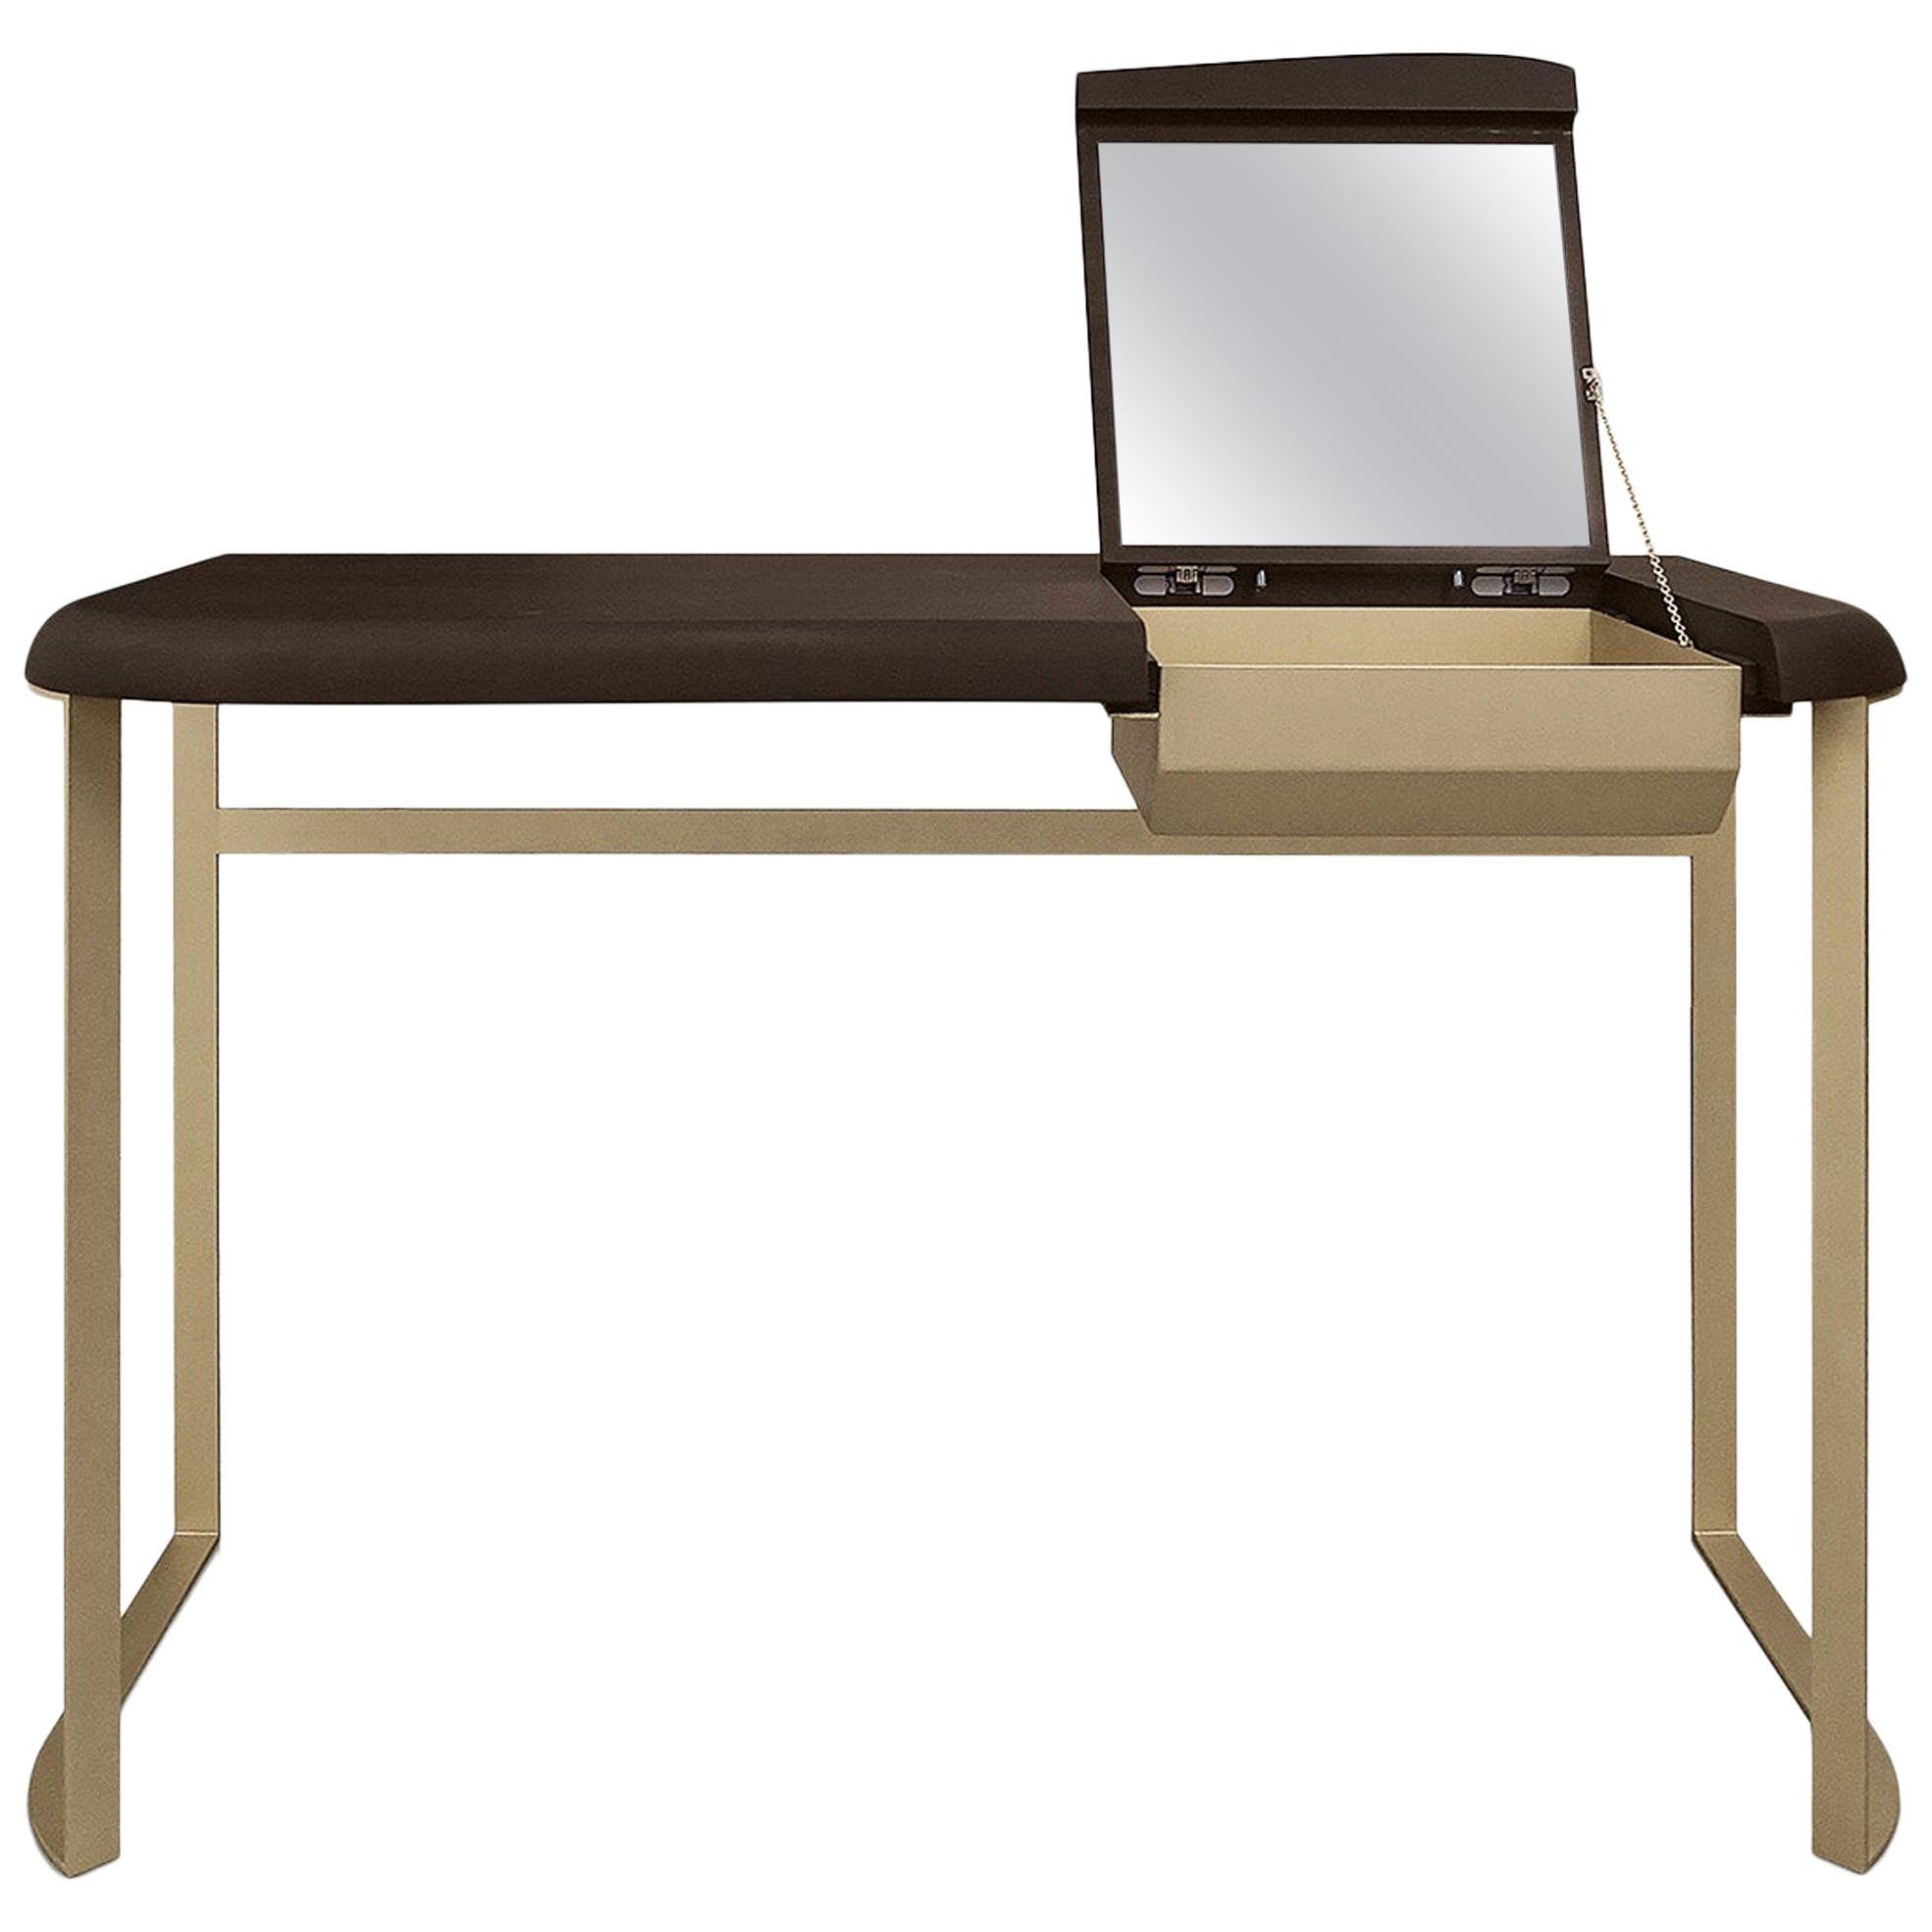 Curvy Vanity Table Available